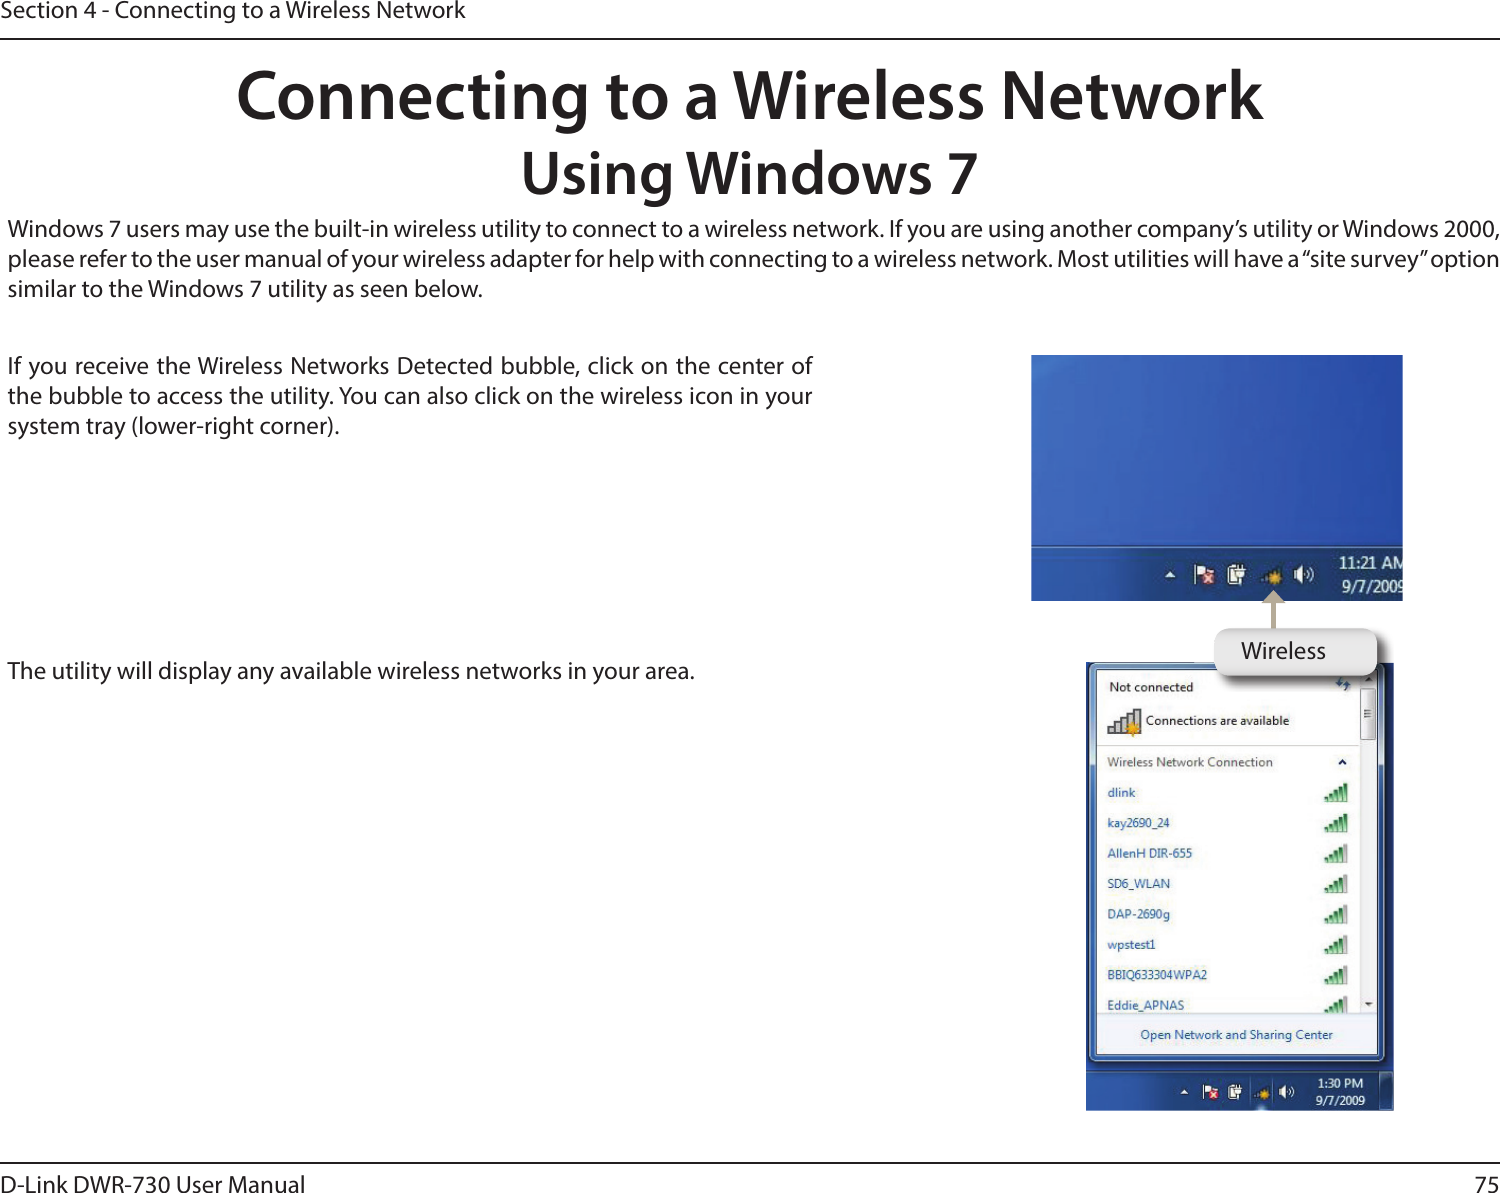 75D-Link DWR-730 User ManualSection 4 - Connecting to a Wireless NetworkConnecting to a Wireless NetworkUsing Windows 7 Windows 7 users may use the built-in wireless utility to connect to a wireless network. If you are using another company’s utility or Windows 2000, please refer to the user manual of your wireless adapter for help with connecting to a wireless network. Most utilities will have a “site survey” option similar to the Windows 7 utility as seen below.If you receive the Wireless Networks Detected bubble, click on the center of the bubble to access the utility. You can also click on the wireless icon in your system tray (lower-right corner).The utility will display any available wireless networks in your area. Wireless